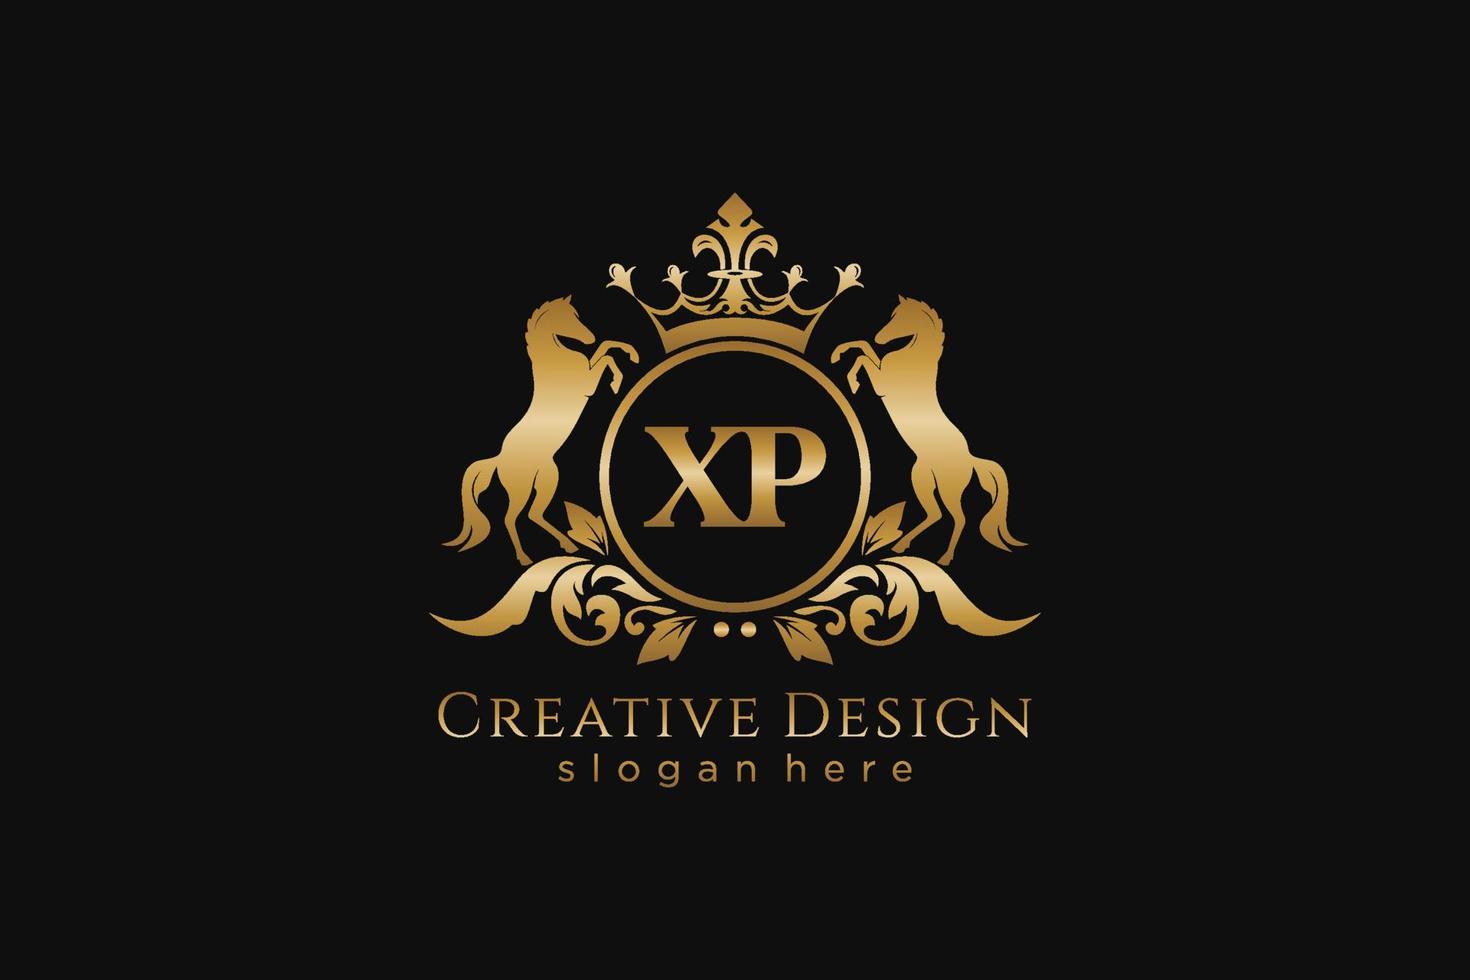 initial XP Retro golden crest with circle and two horses, badge template with scrolls and royal crown - perfect for luxurious branding projects vector